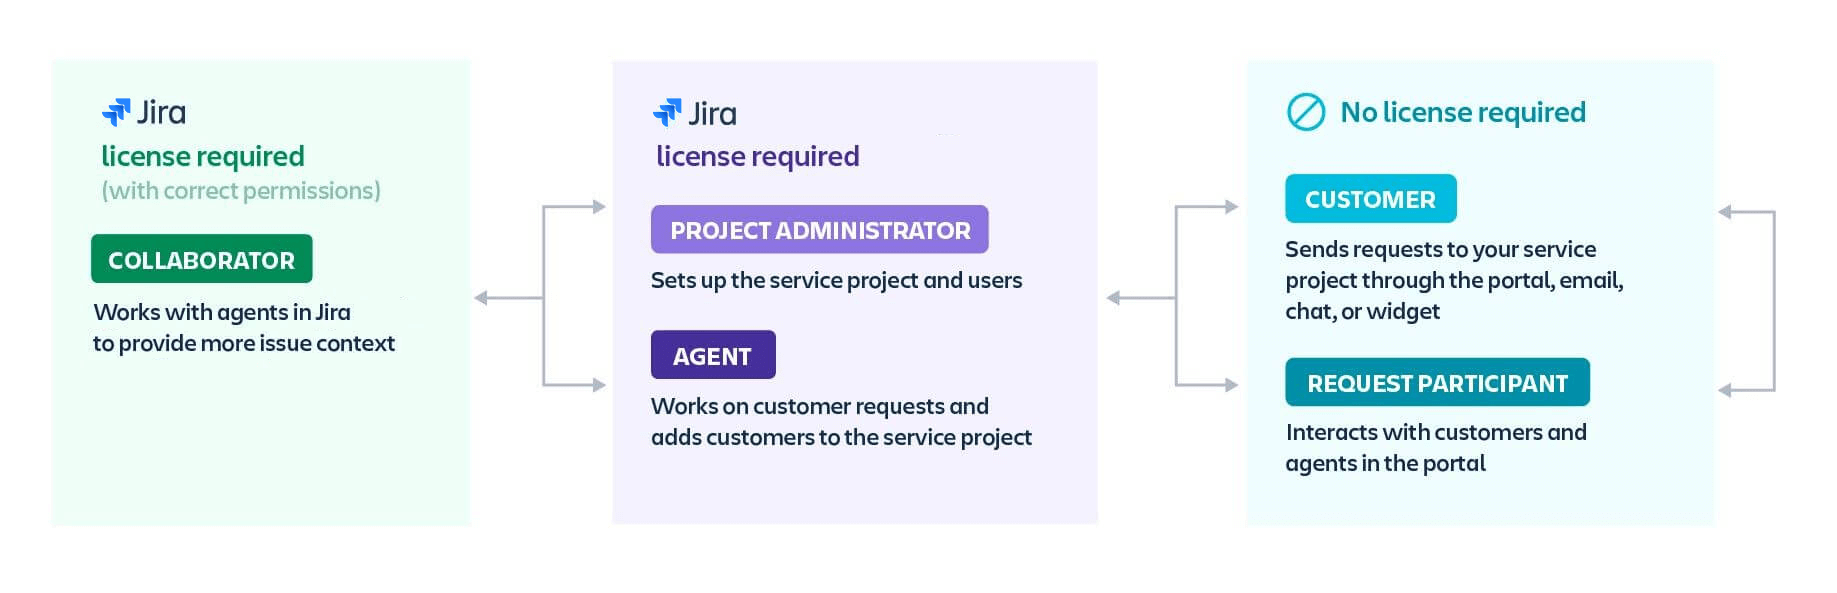 User types across Jira Software and Jira Service Management: collaborator, project administrator, agent, customer, and request participant